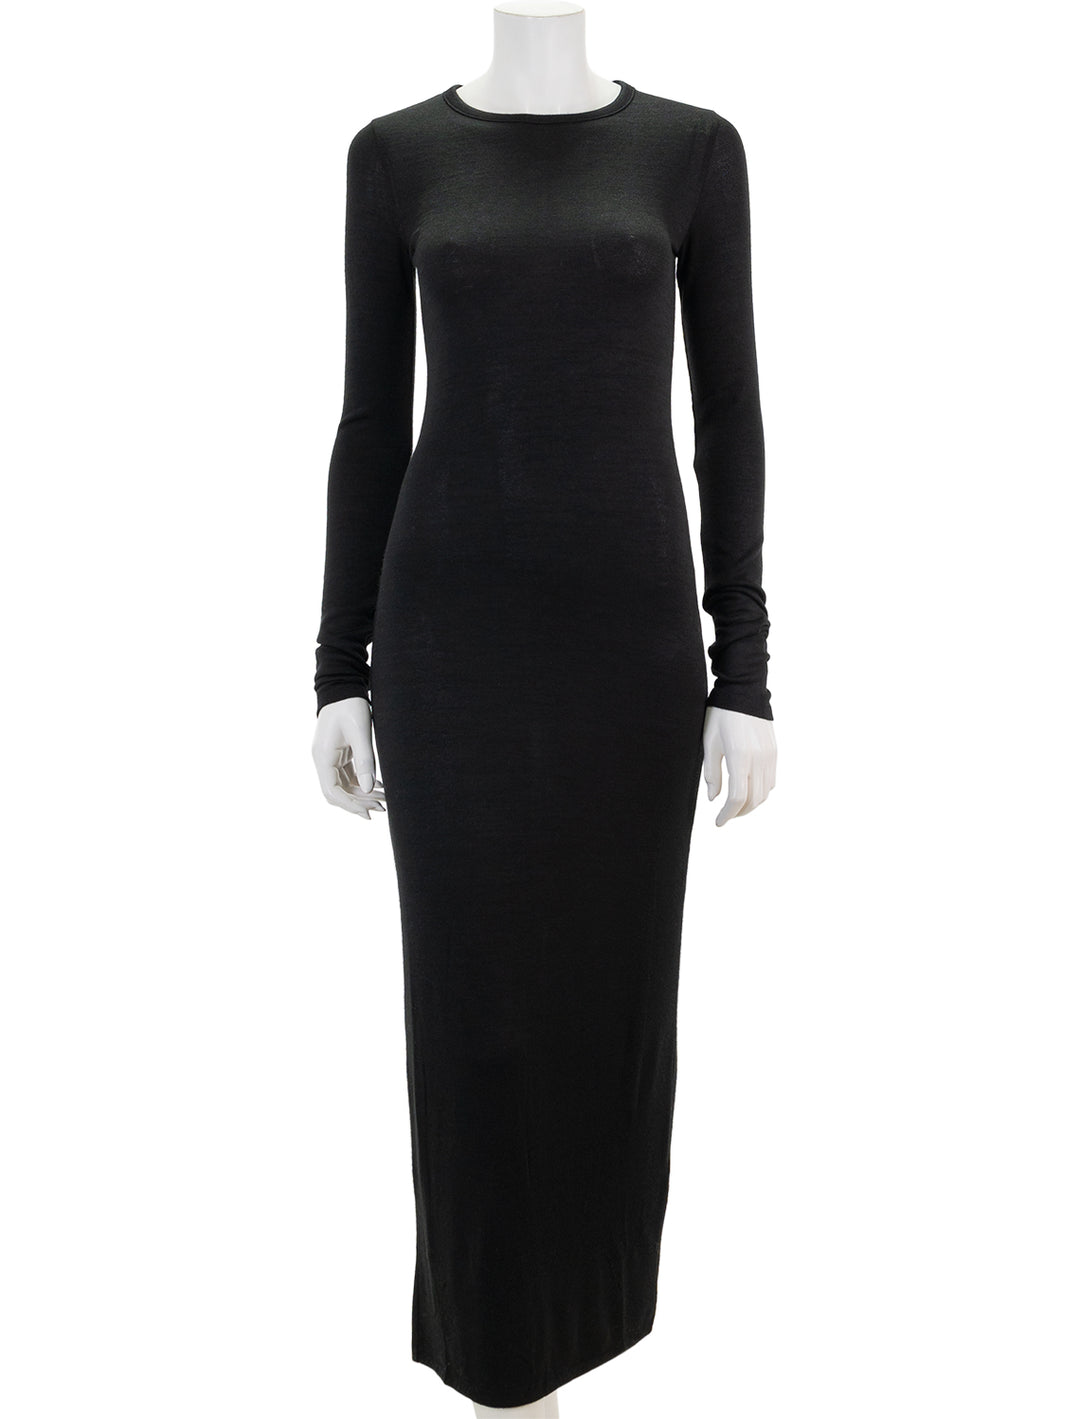 Front view of Rag & Bone's the knit crew maxi dress in black.